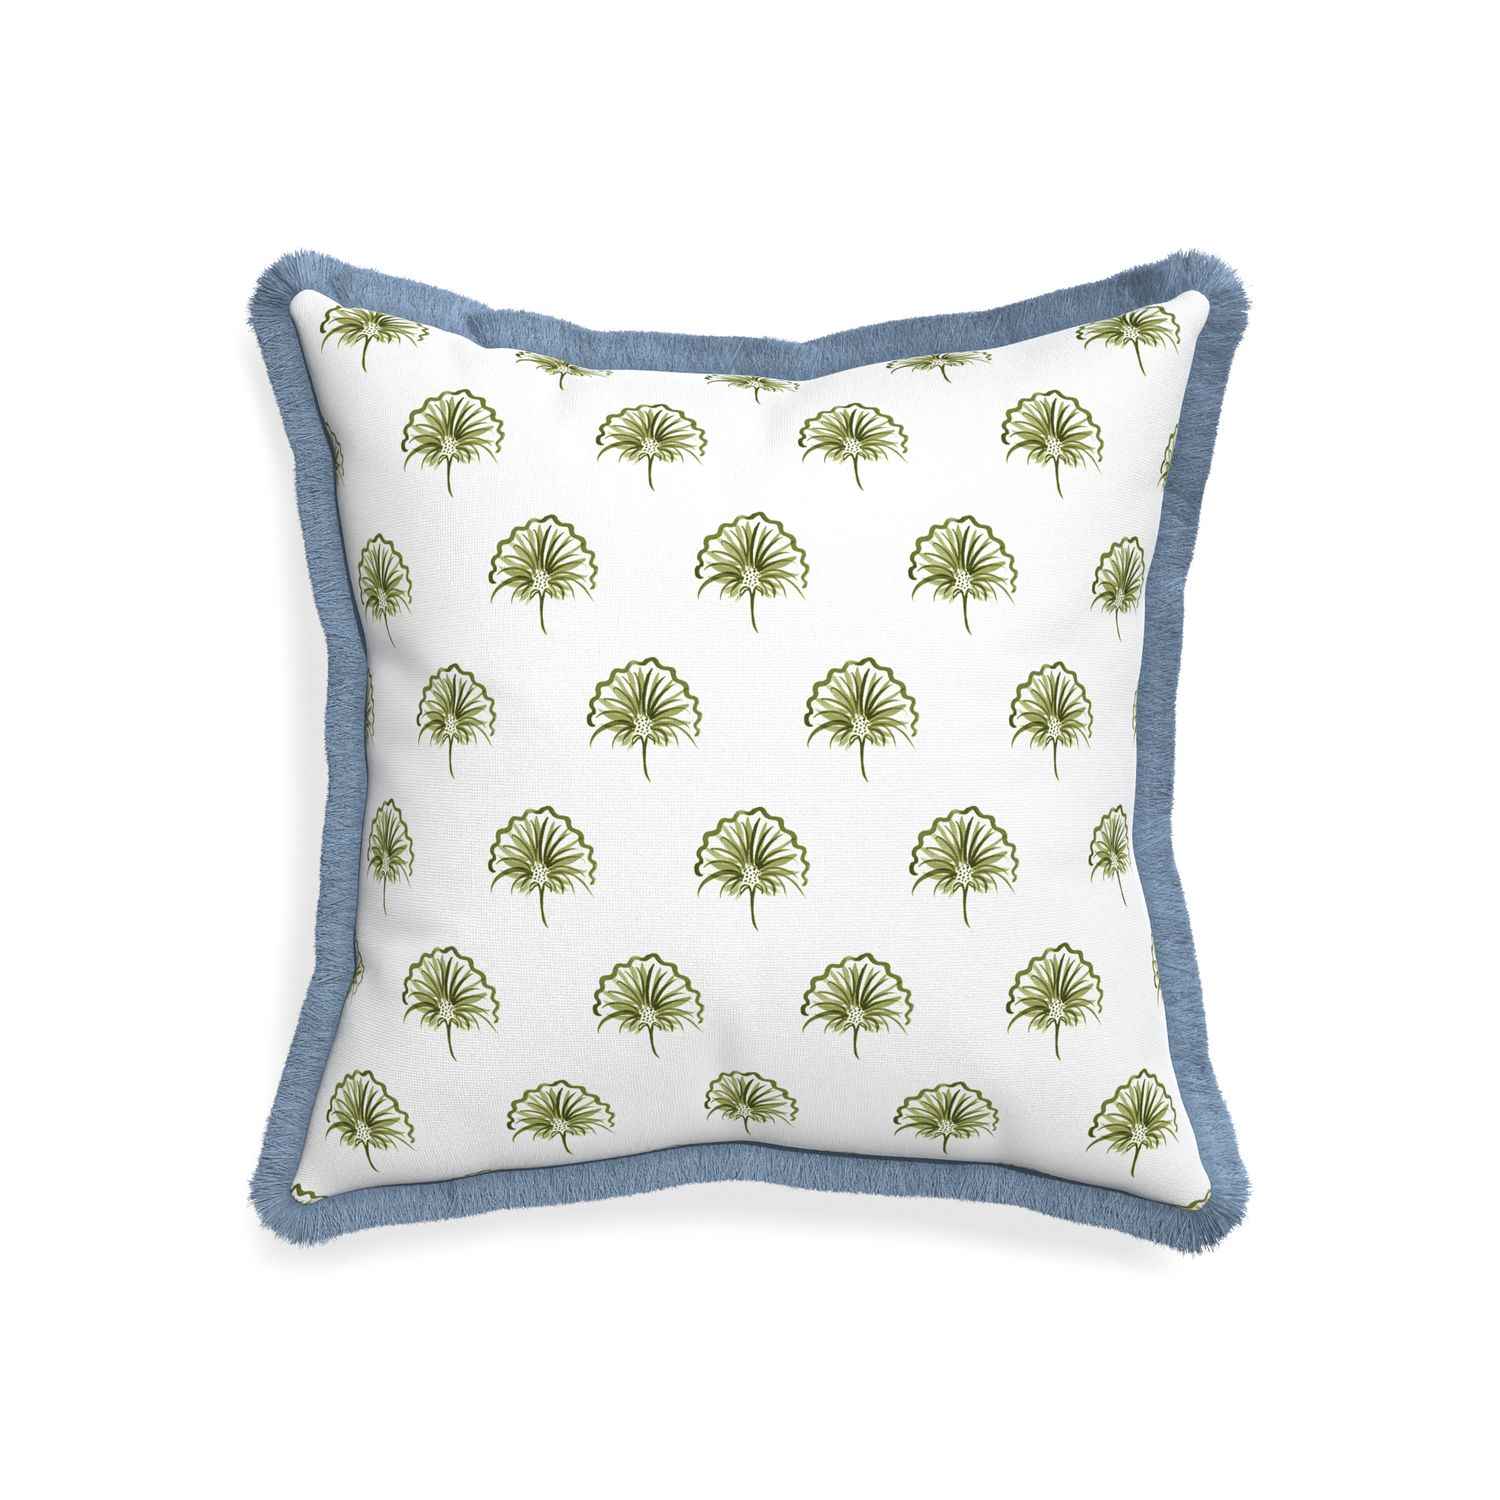 20-square penelope moss custom green floralpillow with sky fringe on white background